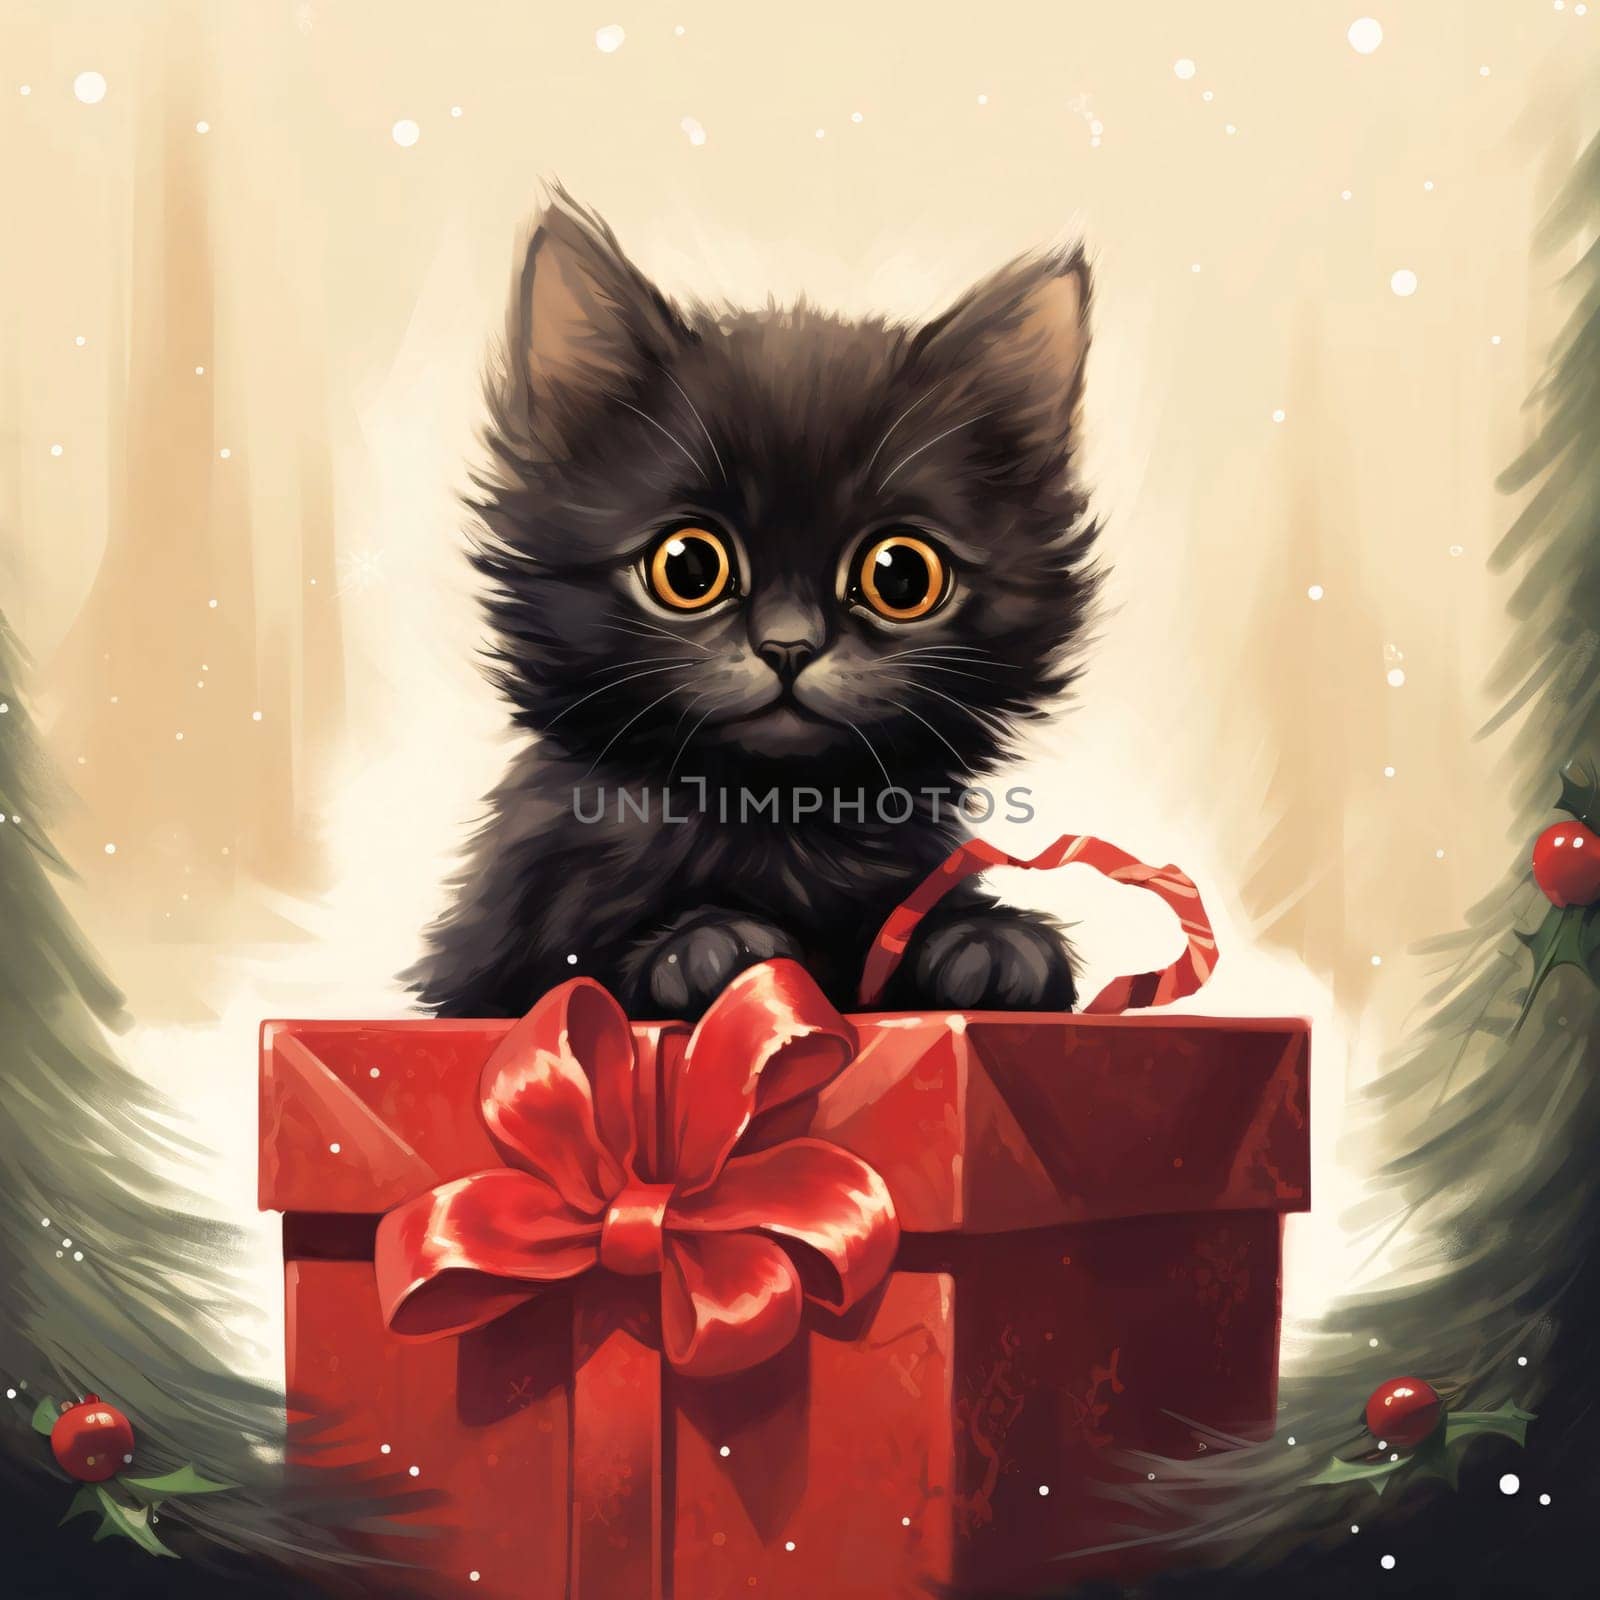 Tiny black cat in a red box, a gift with bows. Gifts as a day symbol of present and love. A time of falling in love and love.